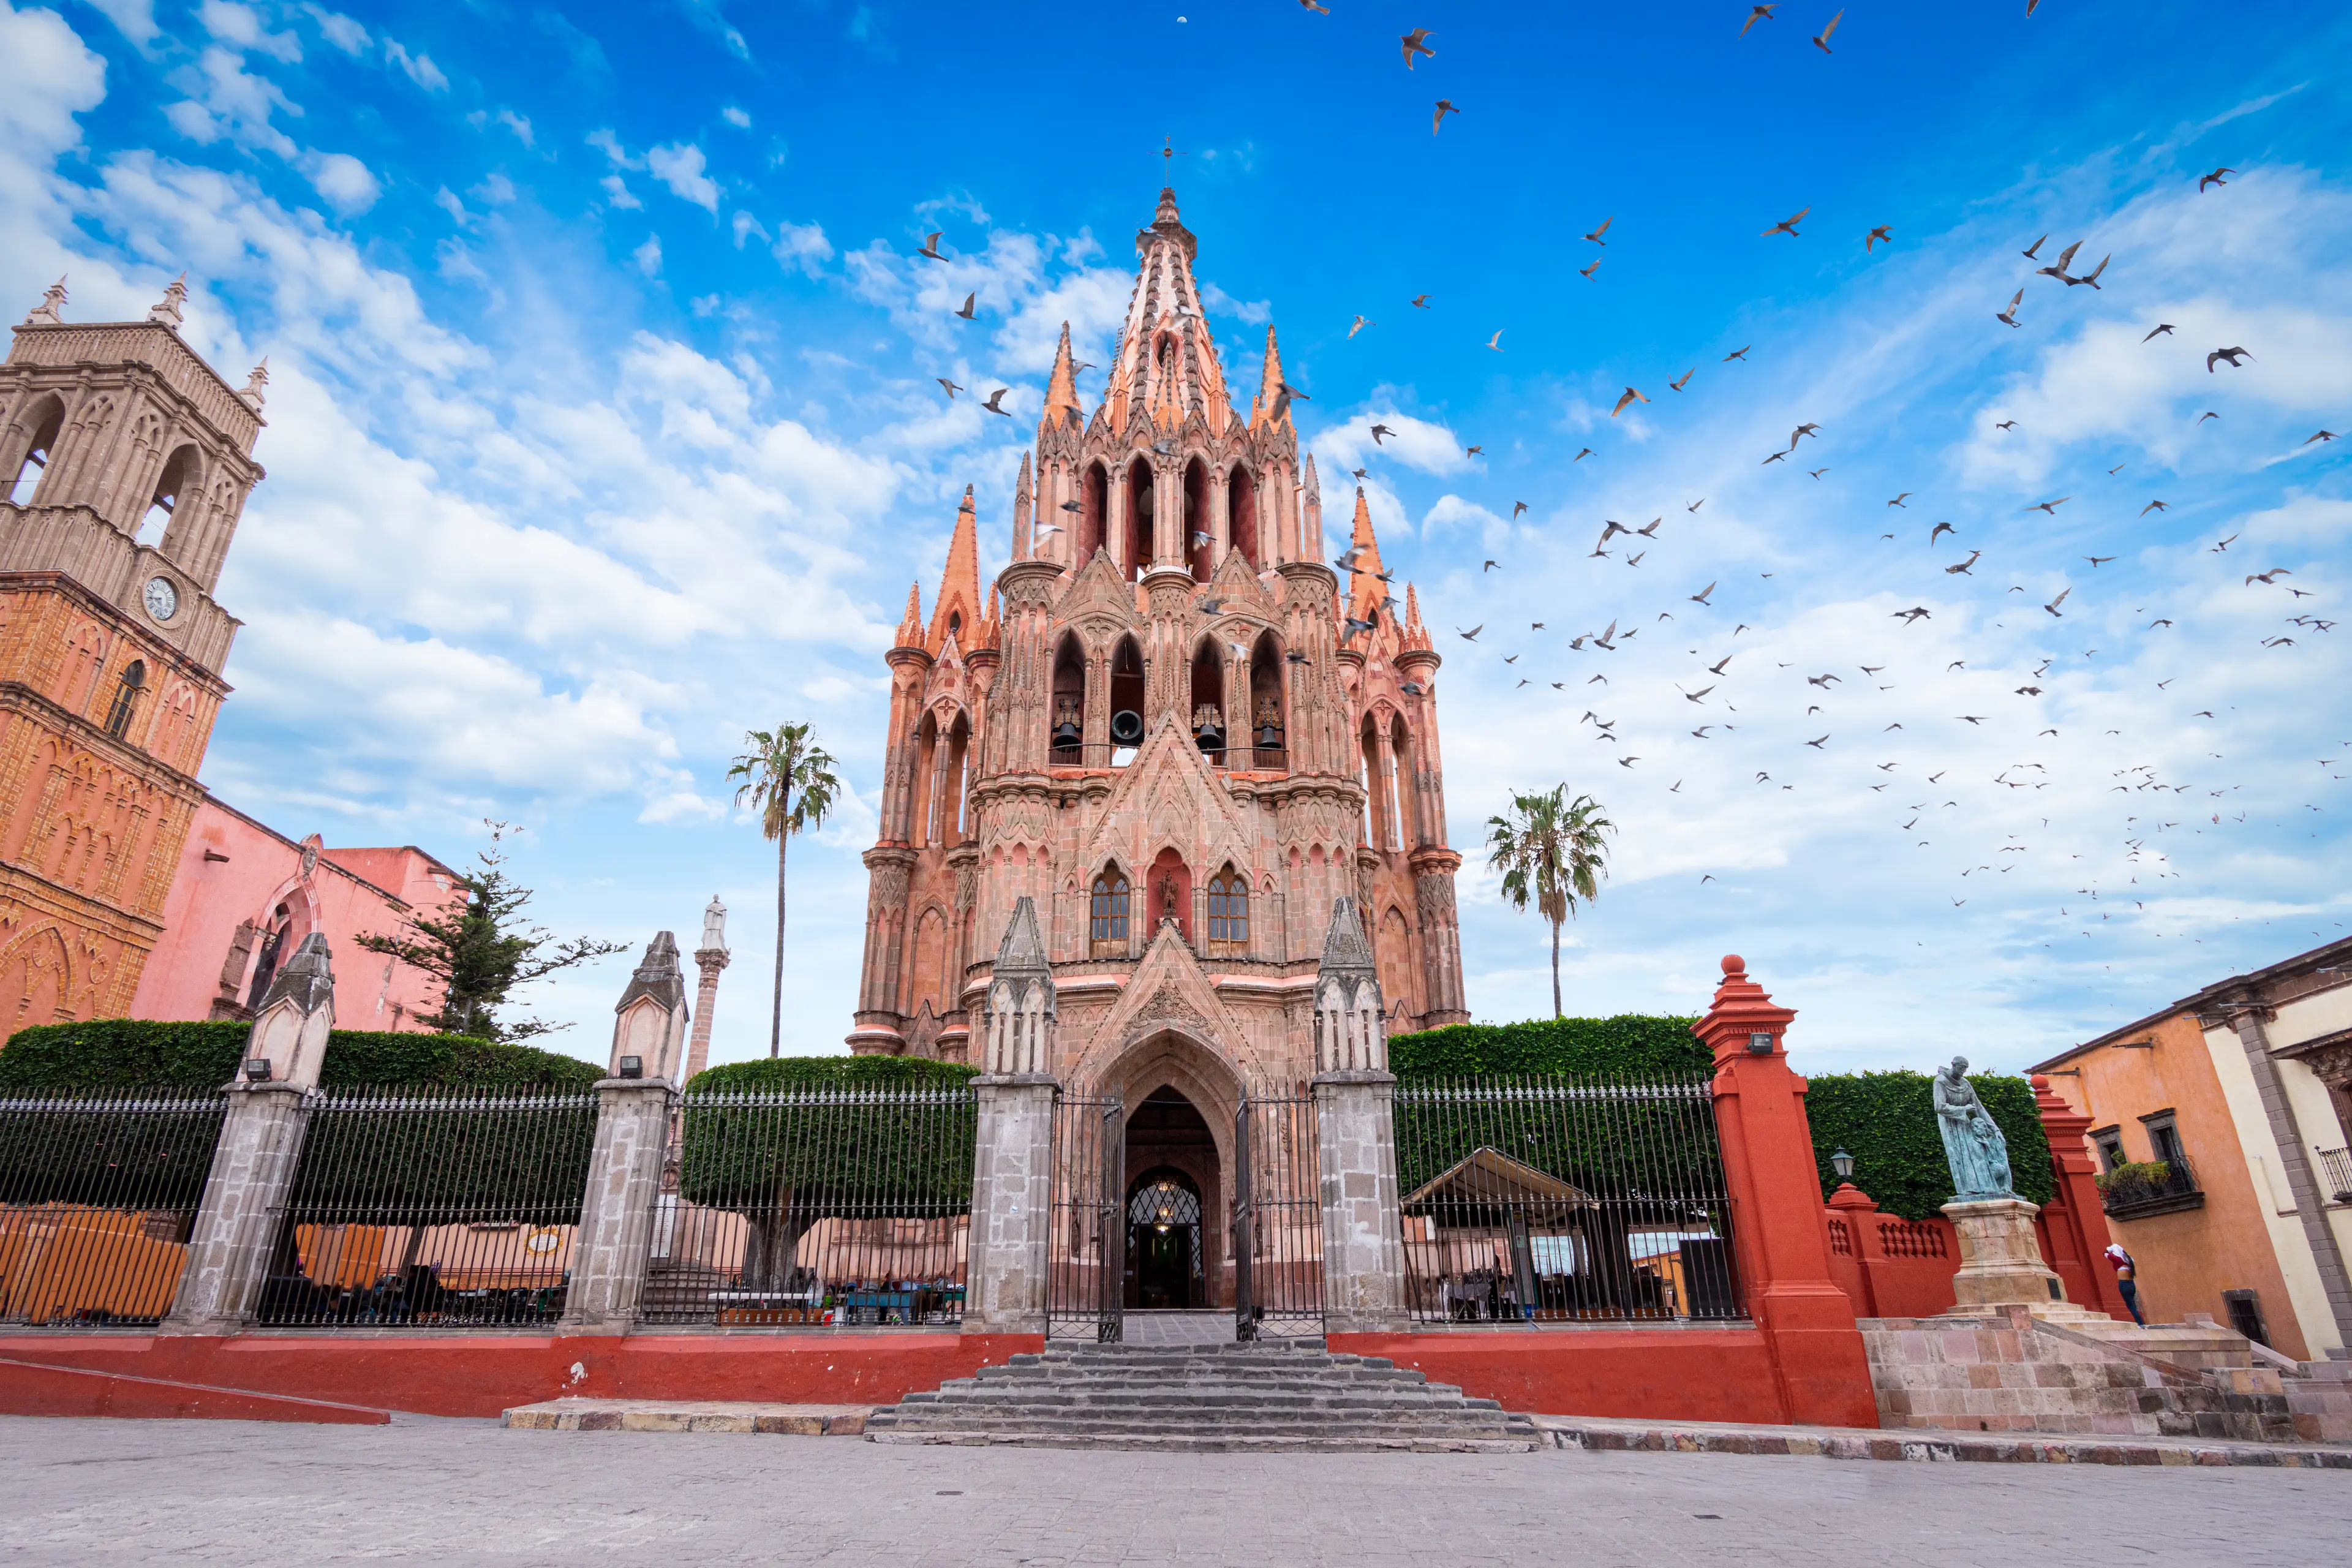 3-Day Solo Adventure & Sightseeing Itinerary in San Miguel de Allende